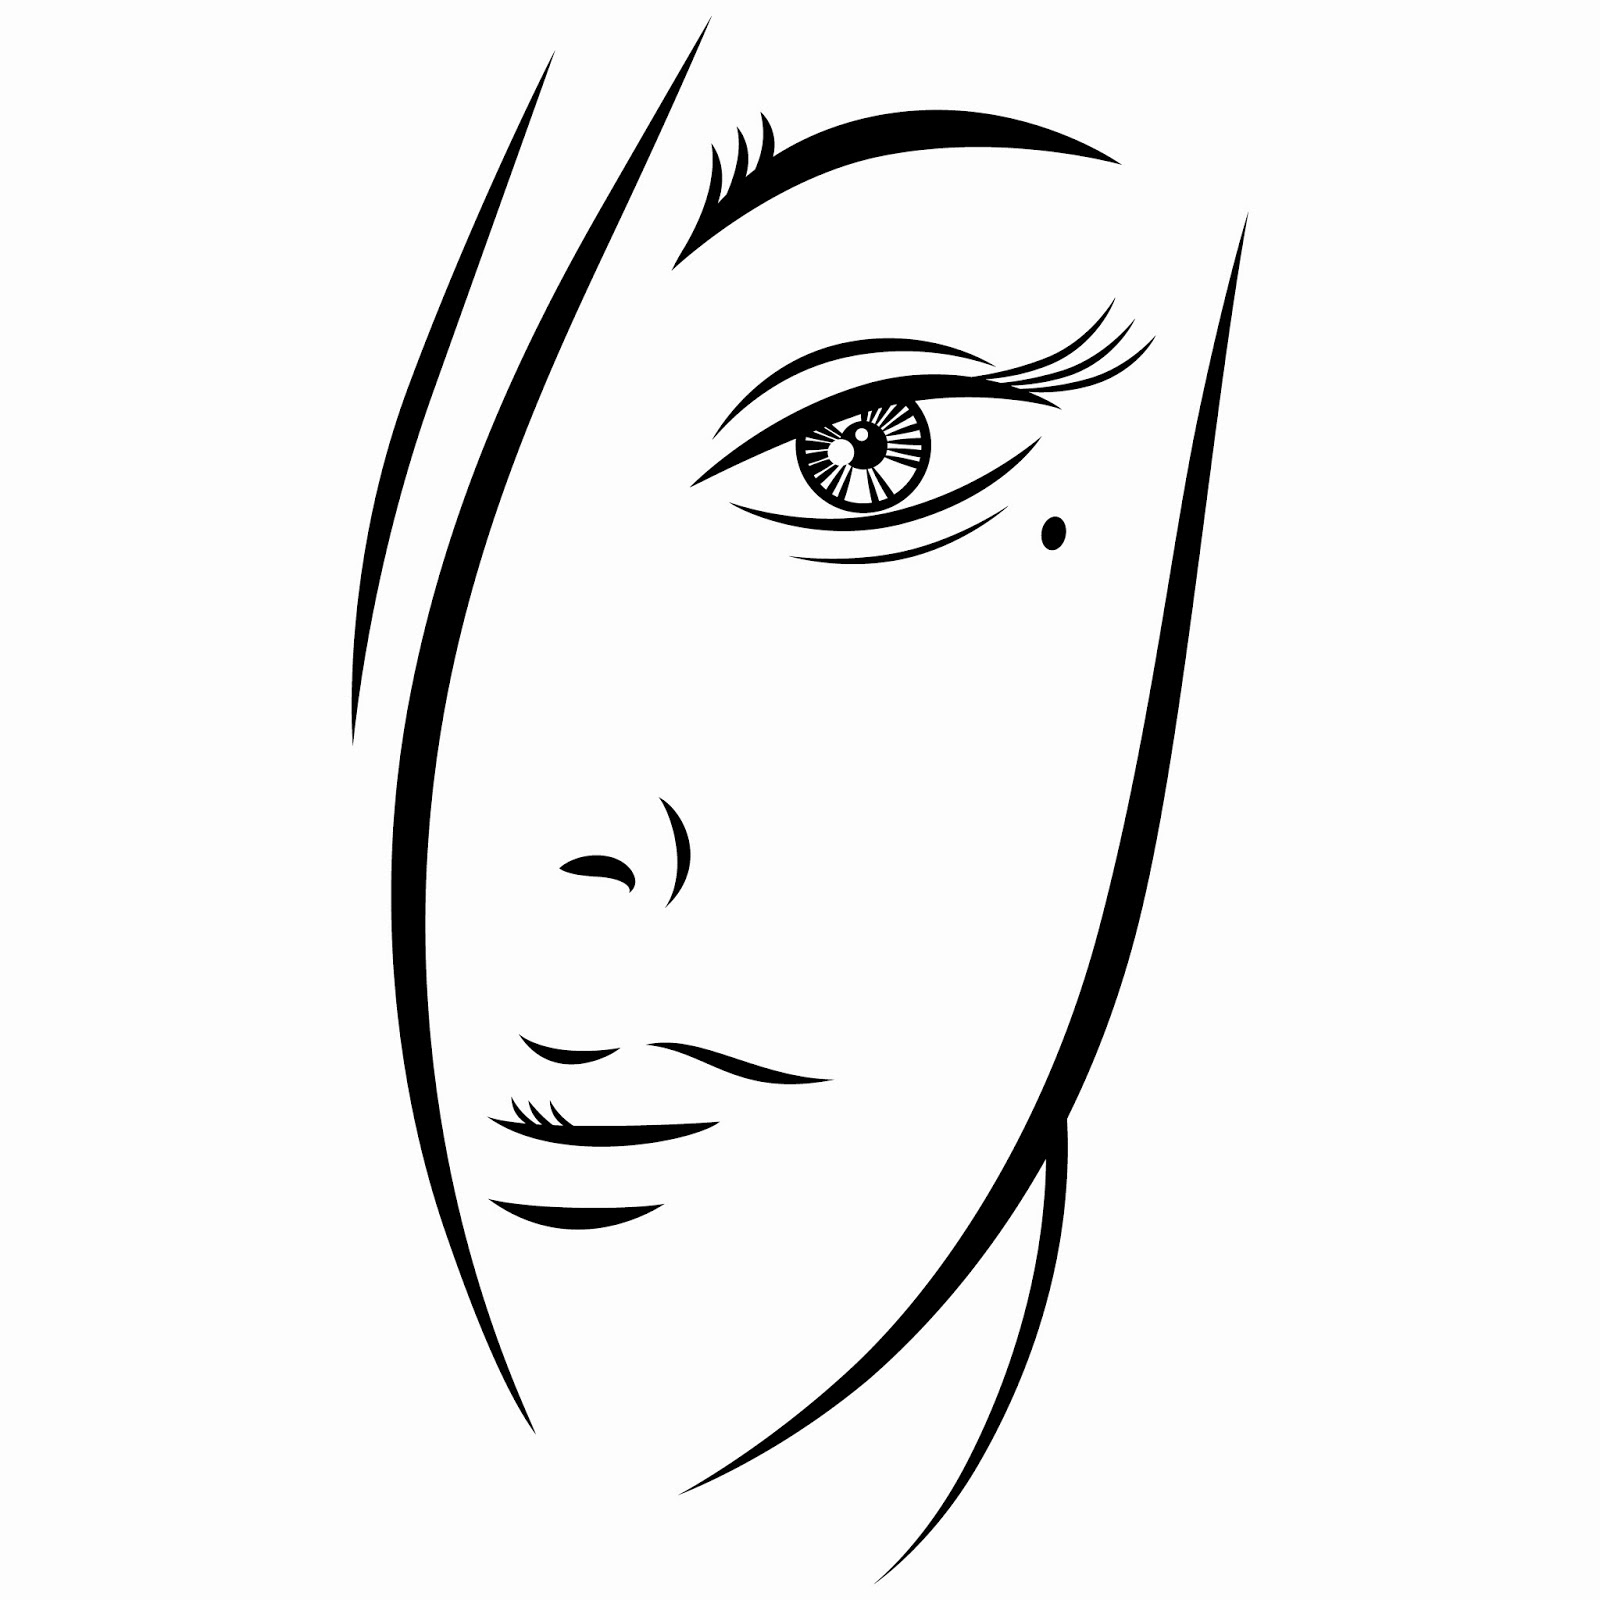 Download Free Eps Vector Illustration  Ink Sketch Of A Person Of Young